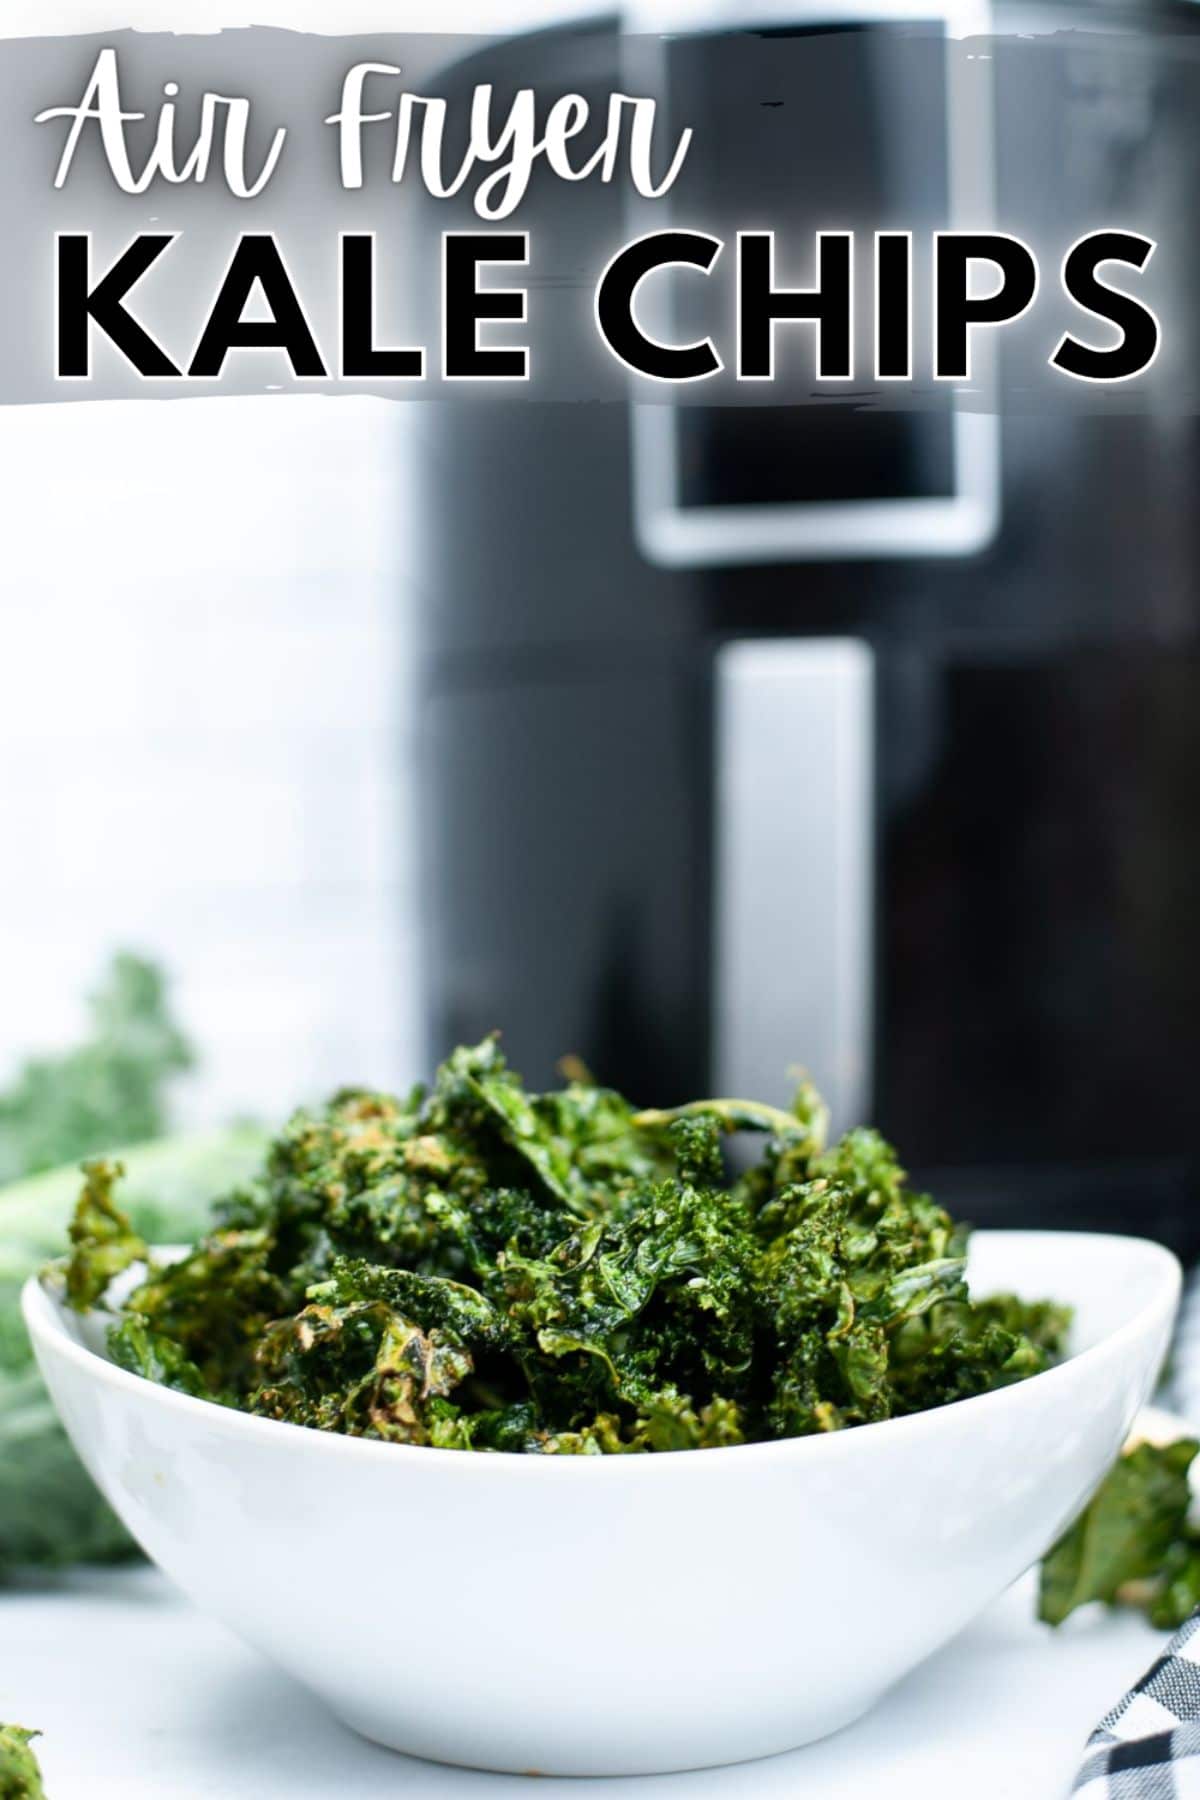 Air Fryer Kale Chips are crispy healthy chips bursting with salt and garlic flavors. These chips are so tasty even the kids will enjoy them! #airfryer #kalechips #lowcarb #keto #recipe via @wondermomwannab